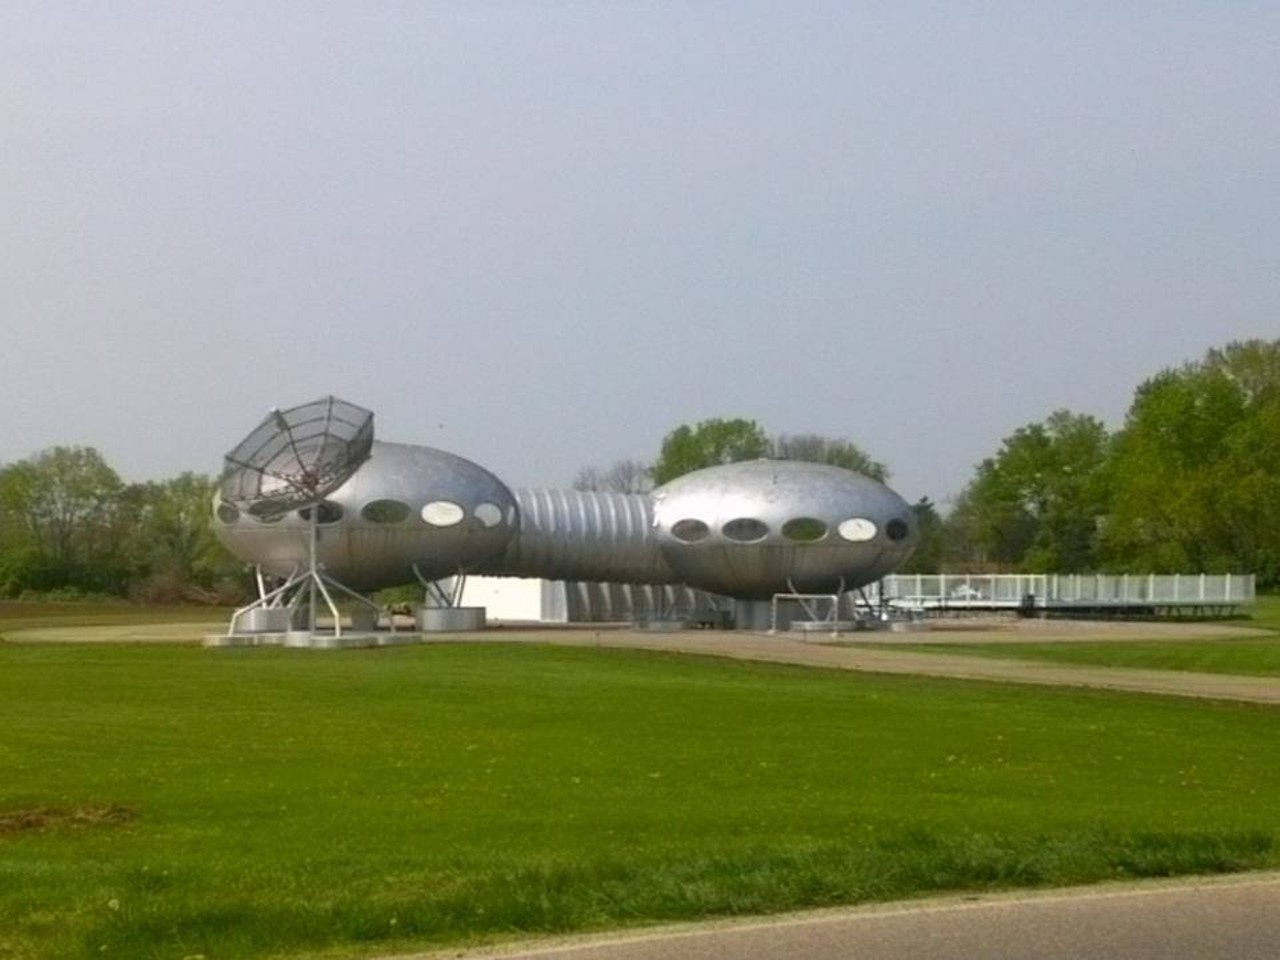  The Futuro House
9961 Central Ave., Carlisle
Finnish architect Matti Suuronen designed around 100 houses shaped like spaceships during the 1960s and '70s. The houses can be found all over the world, but this one is in Carlisle, Ohio, where I-75 meets I-71, just north of Cincinnati.
Photo via Futuro House/Facebook